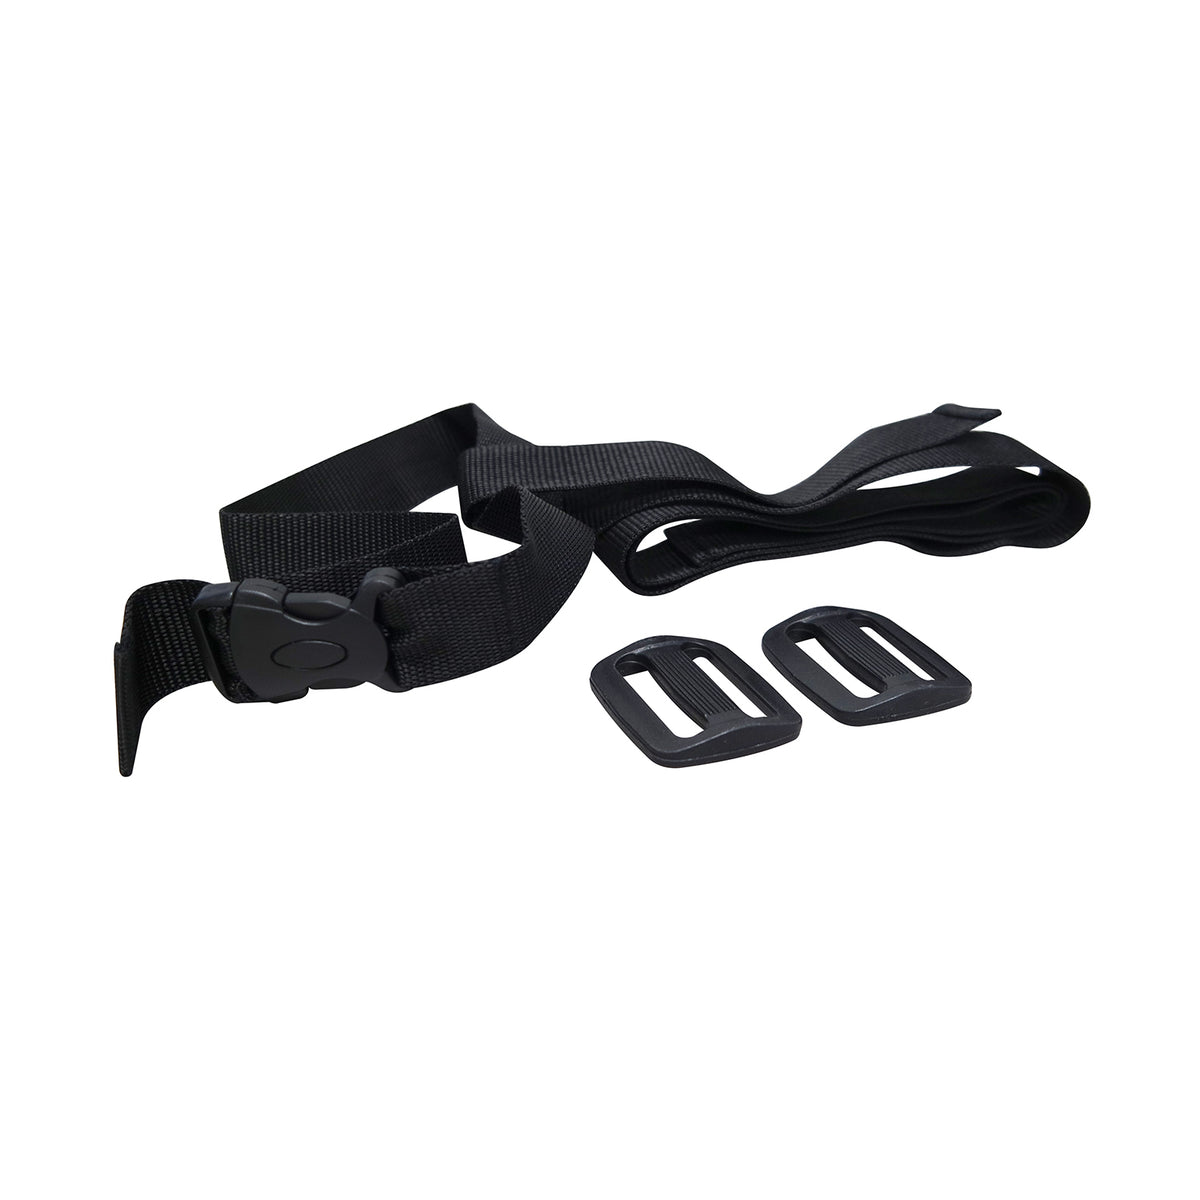 Tripod Strap with Buckles -Tripods & Accessories- eGPS Solutions Inc.